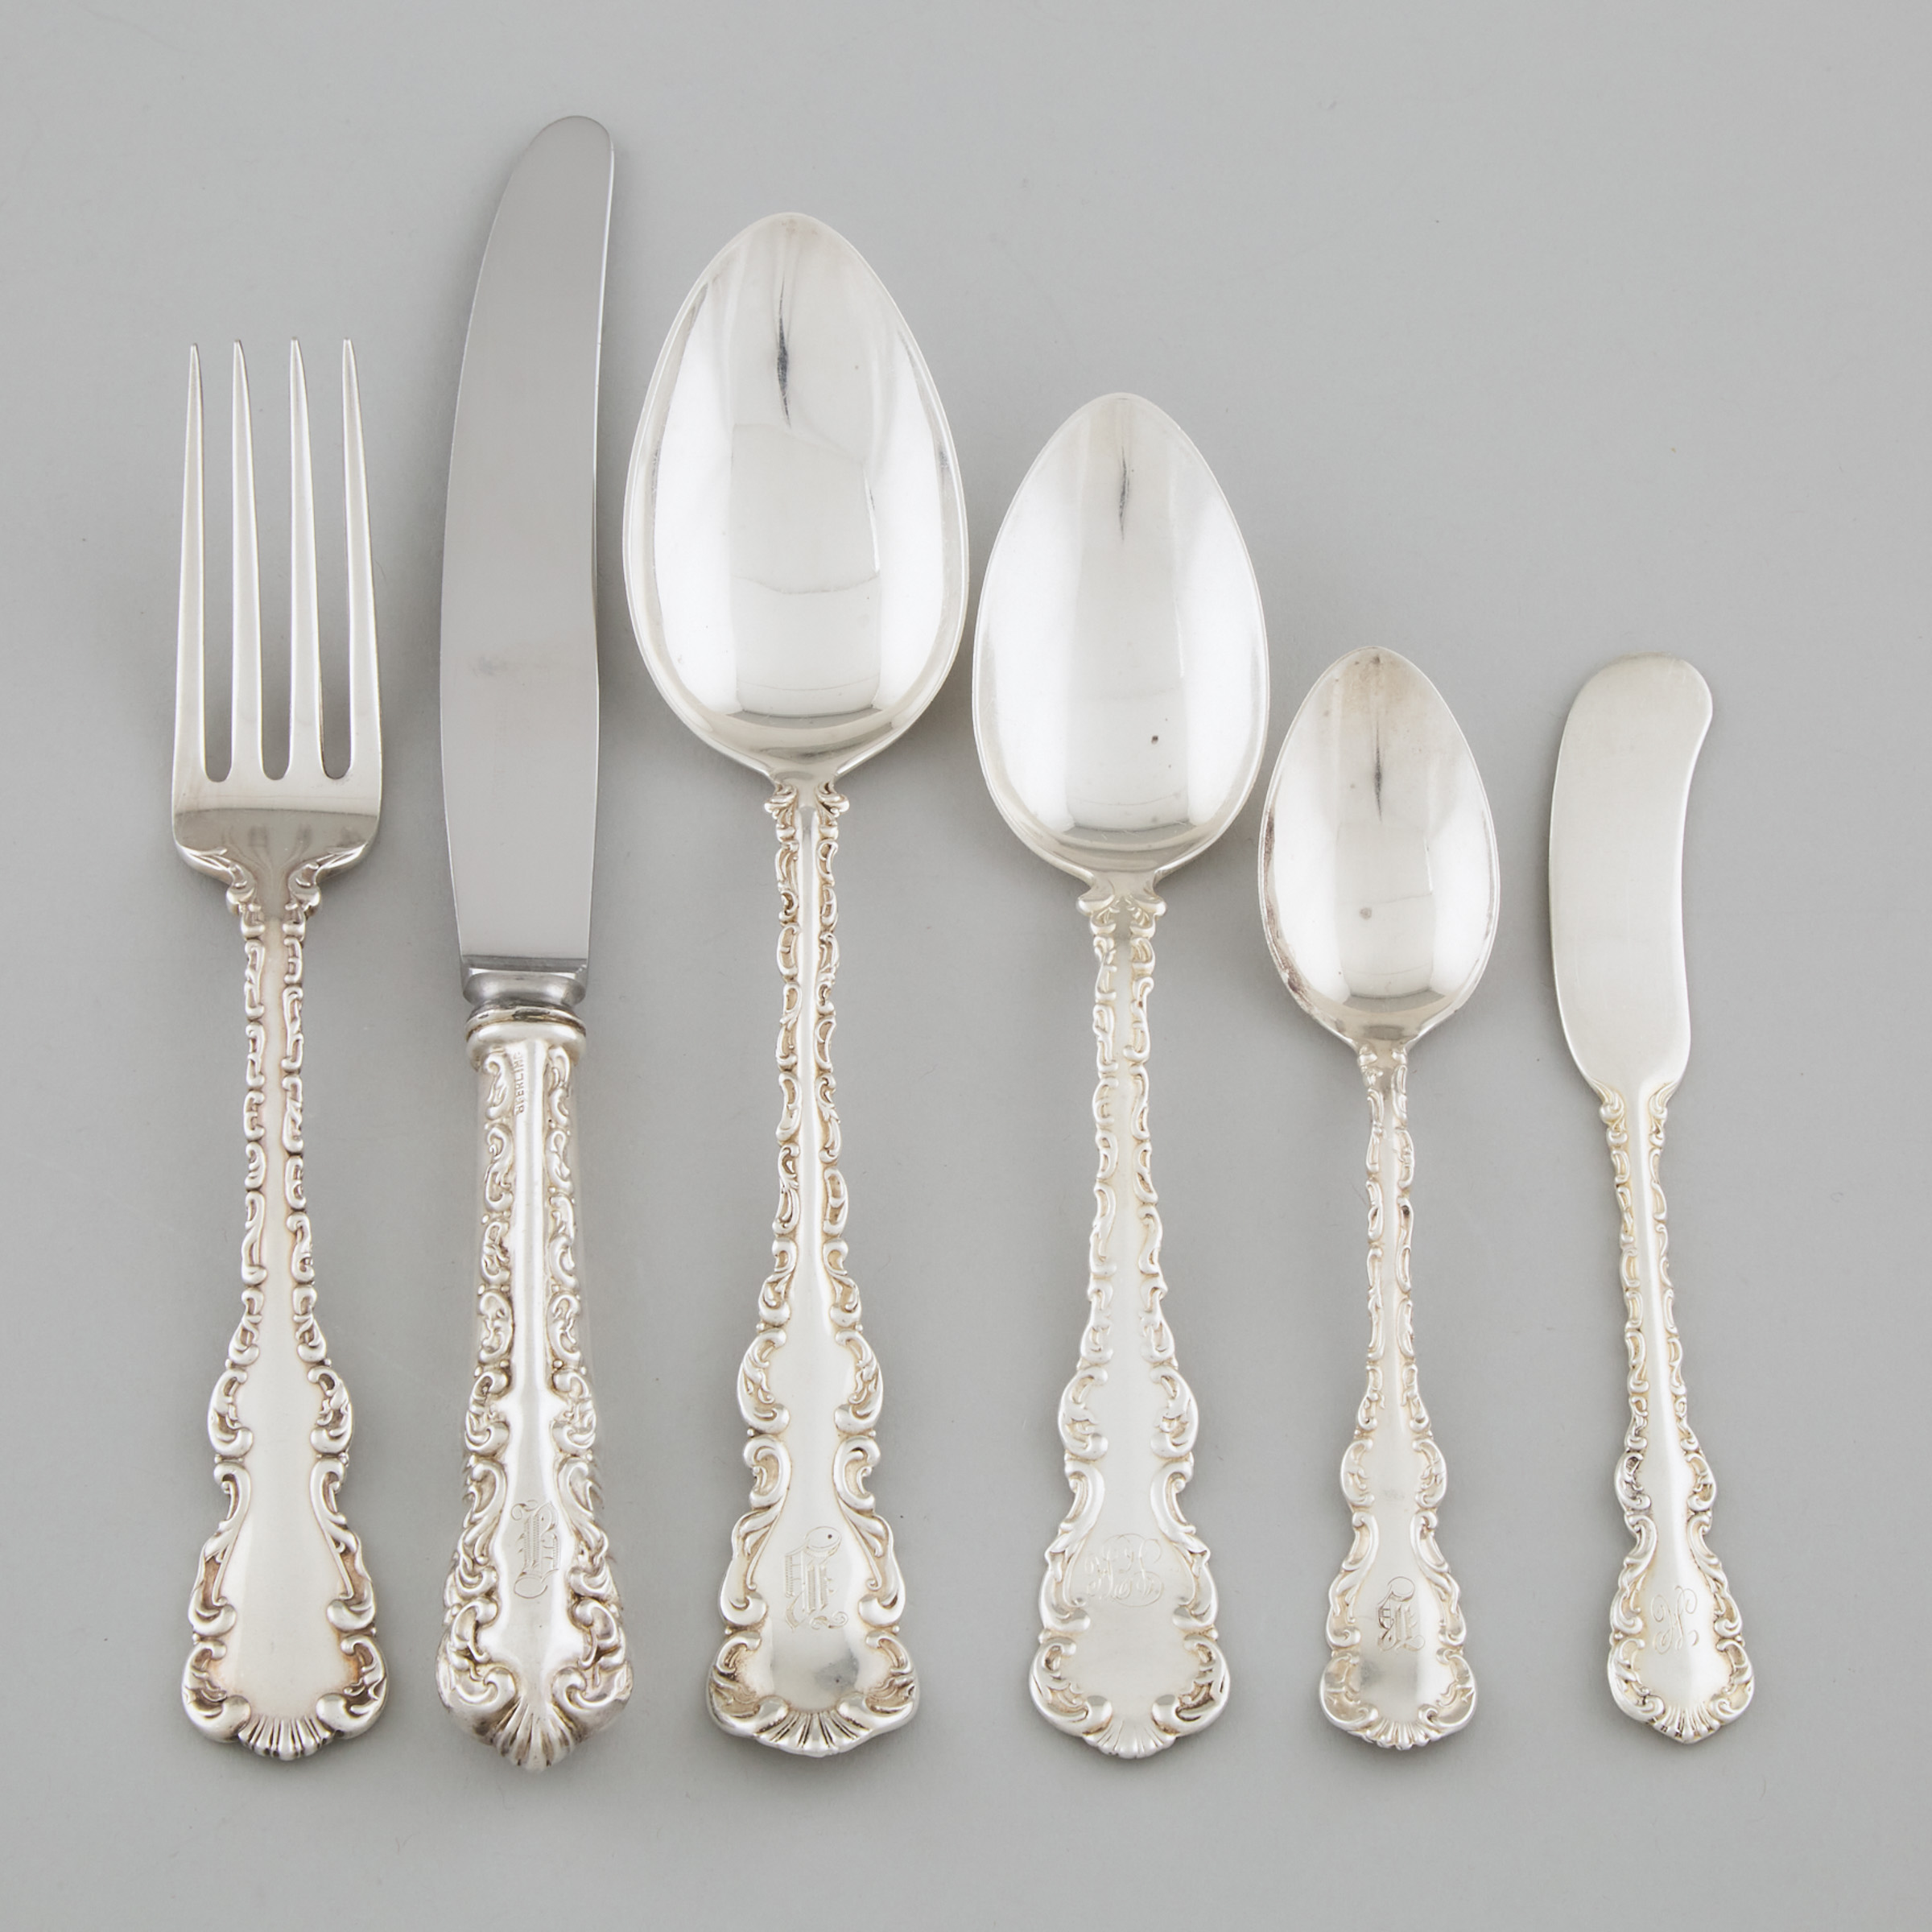 Canadian Silver 'Louis XV' Pattern Flatware Service, mainly Roden Bros., Toronto, Ont., 20th century 